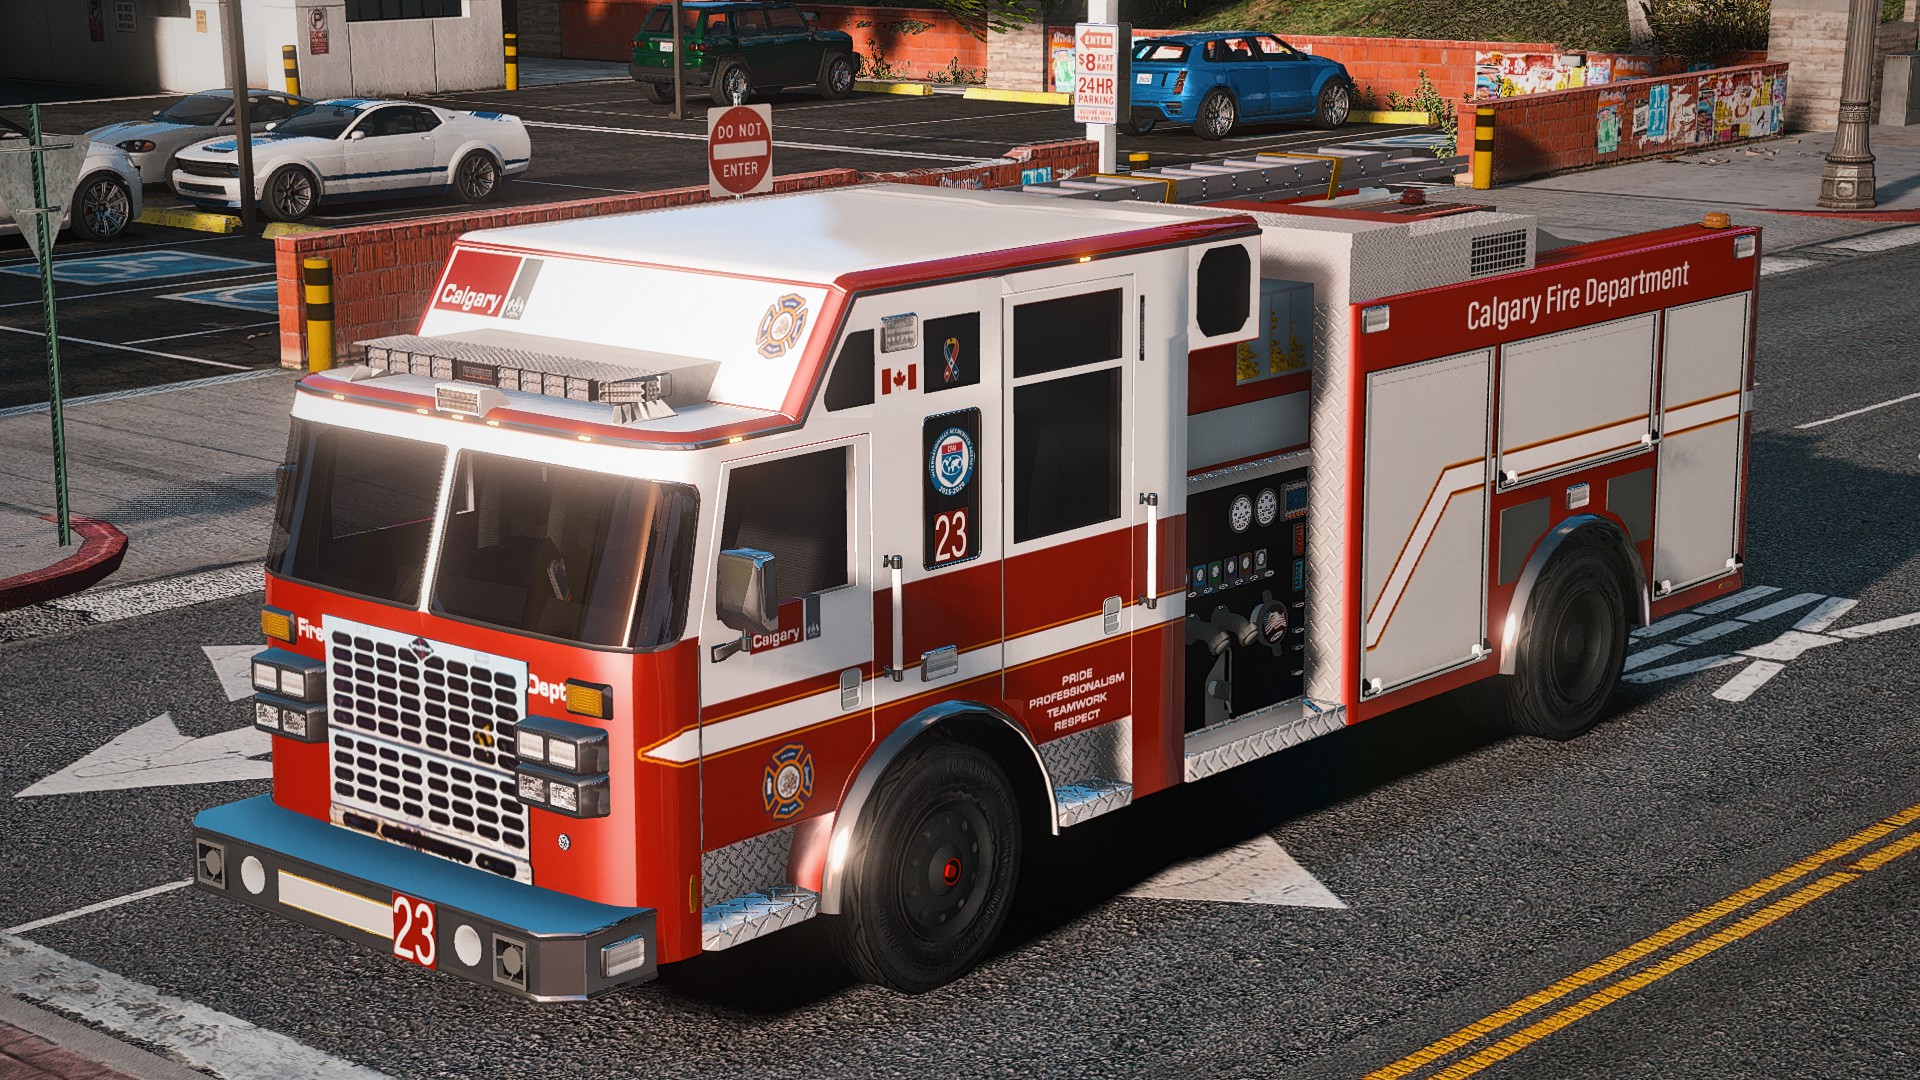 CFD Truck 23